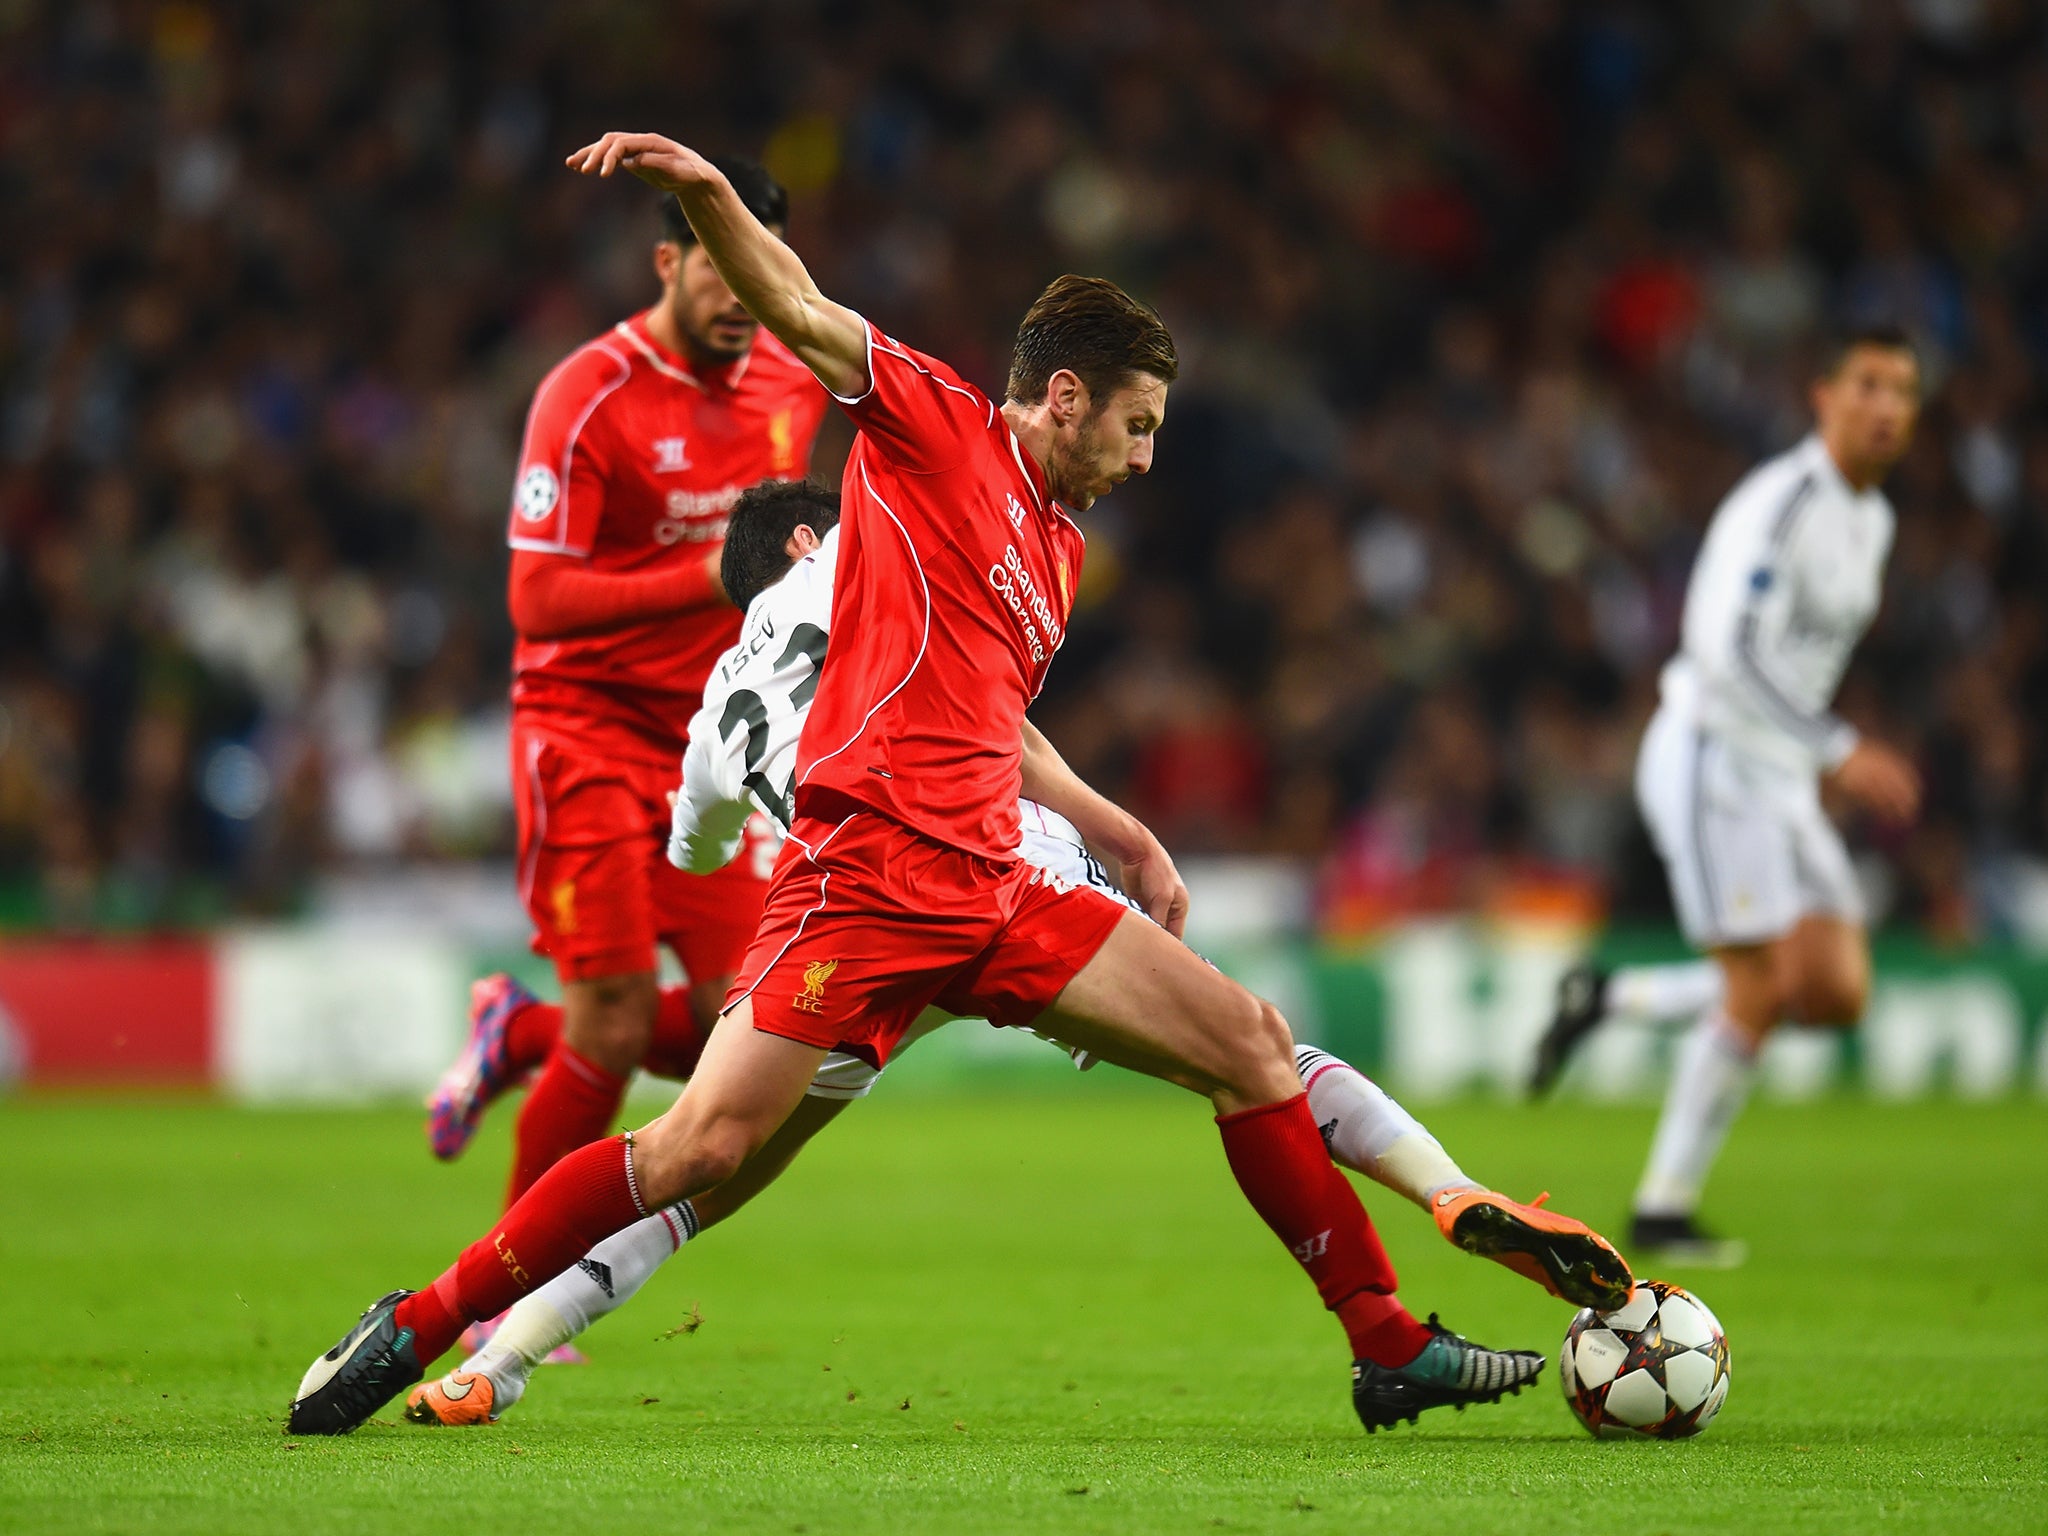 Lallana in action